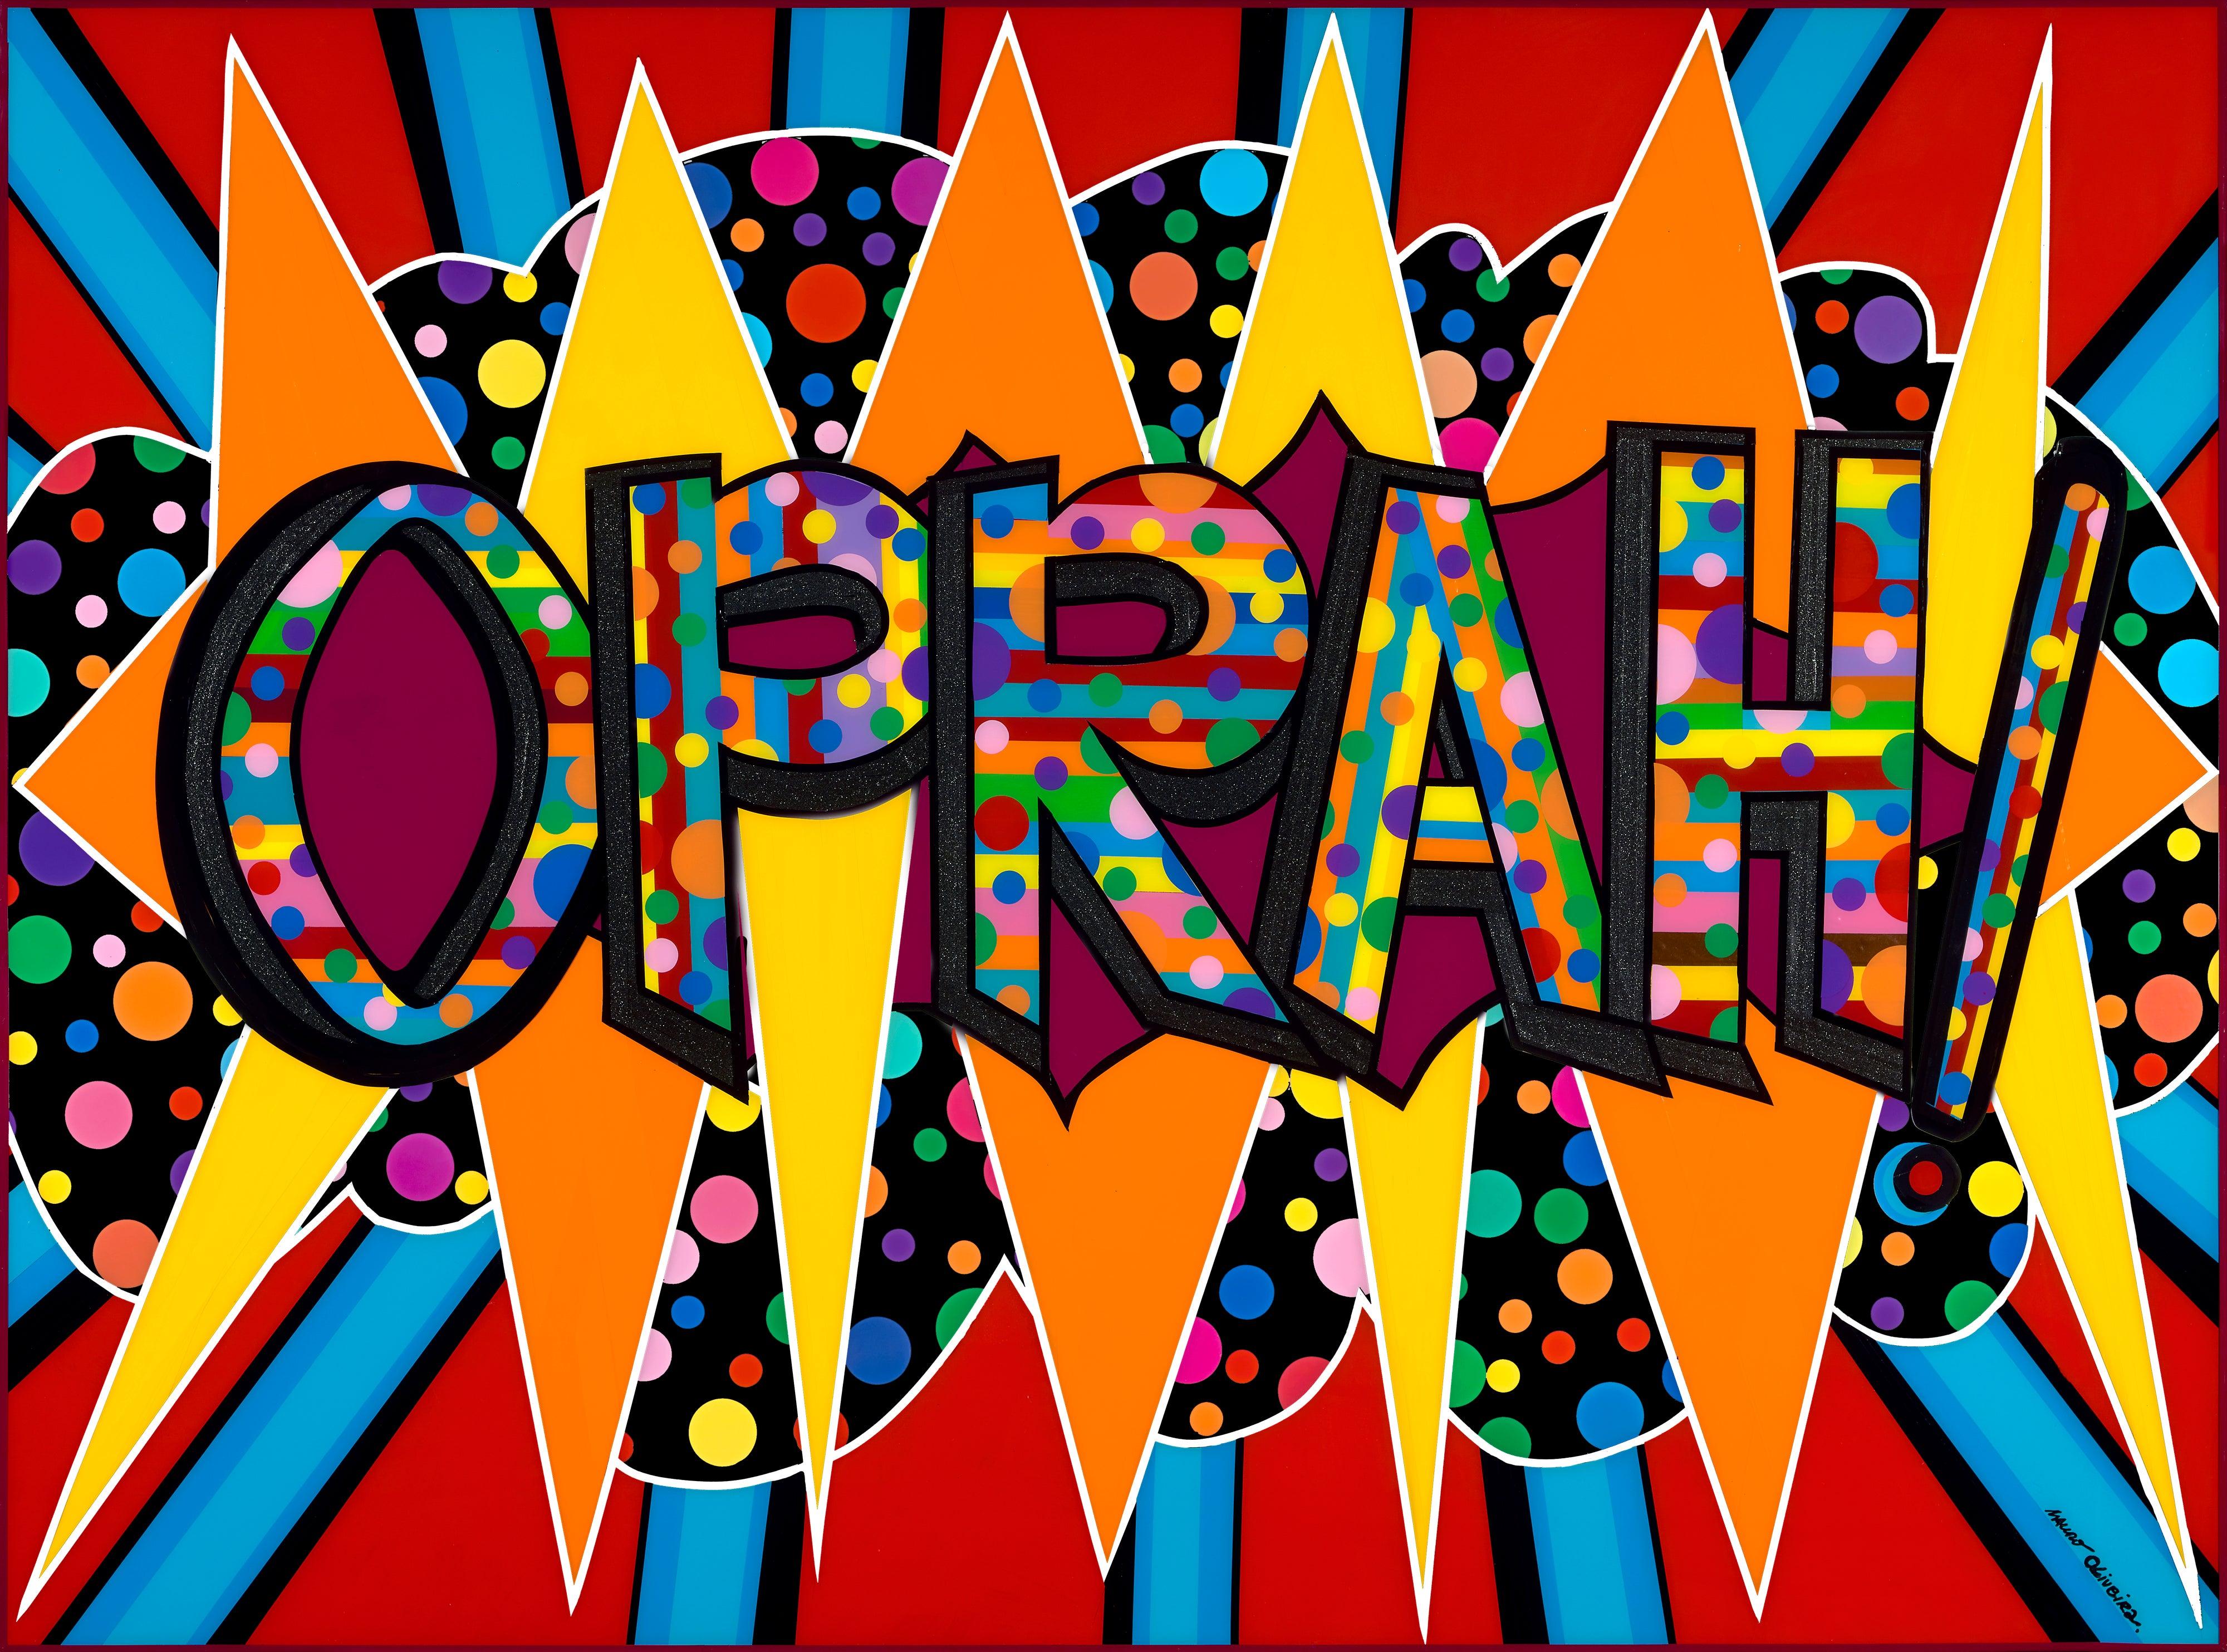 Mauro Oliveira Abstract Print - Oprah! A True Pop Icon III (Limited Edition Print)